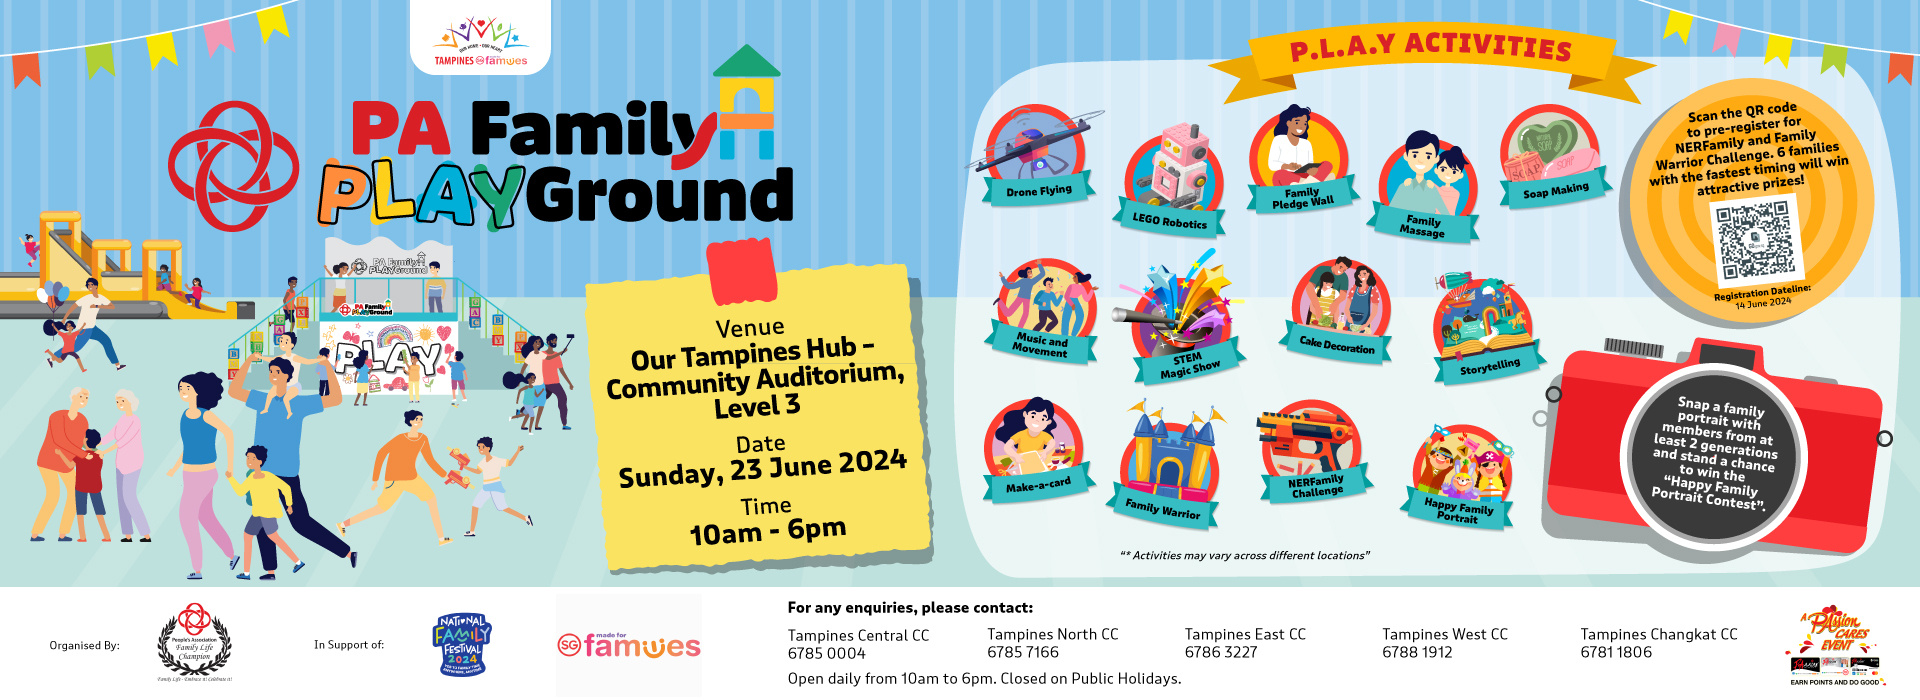 PA Family PLAYGround at Tampines GRC - in support of National Family Festival